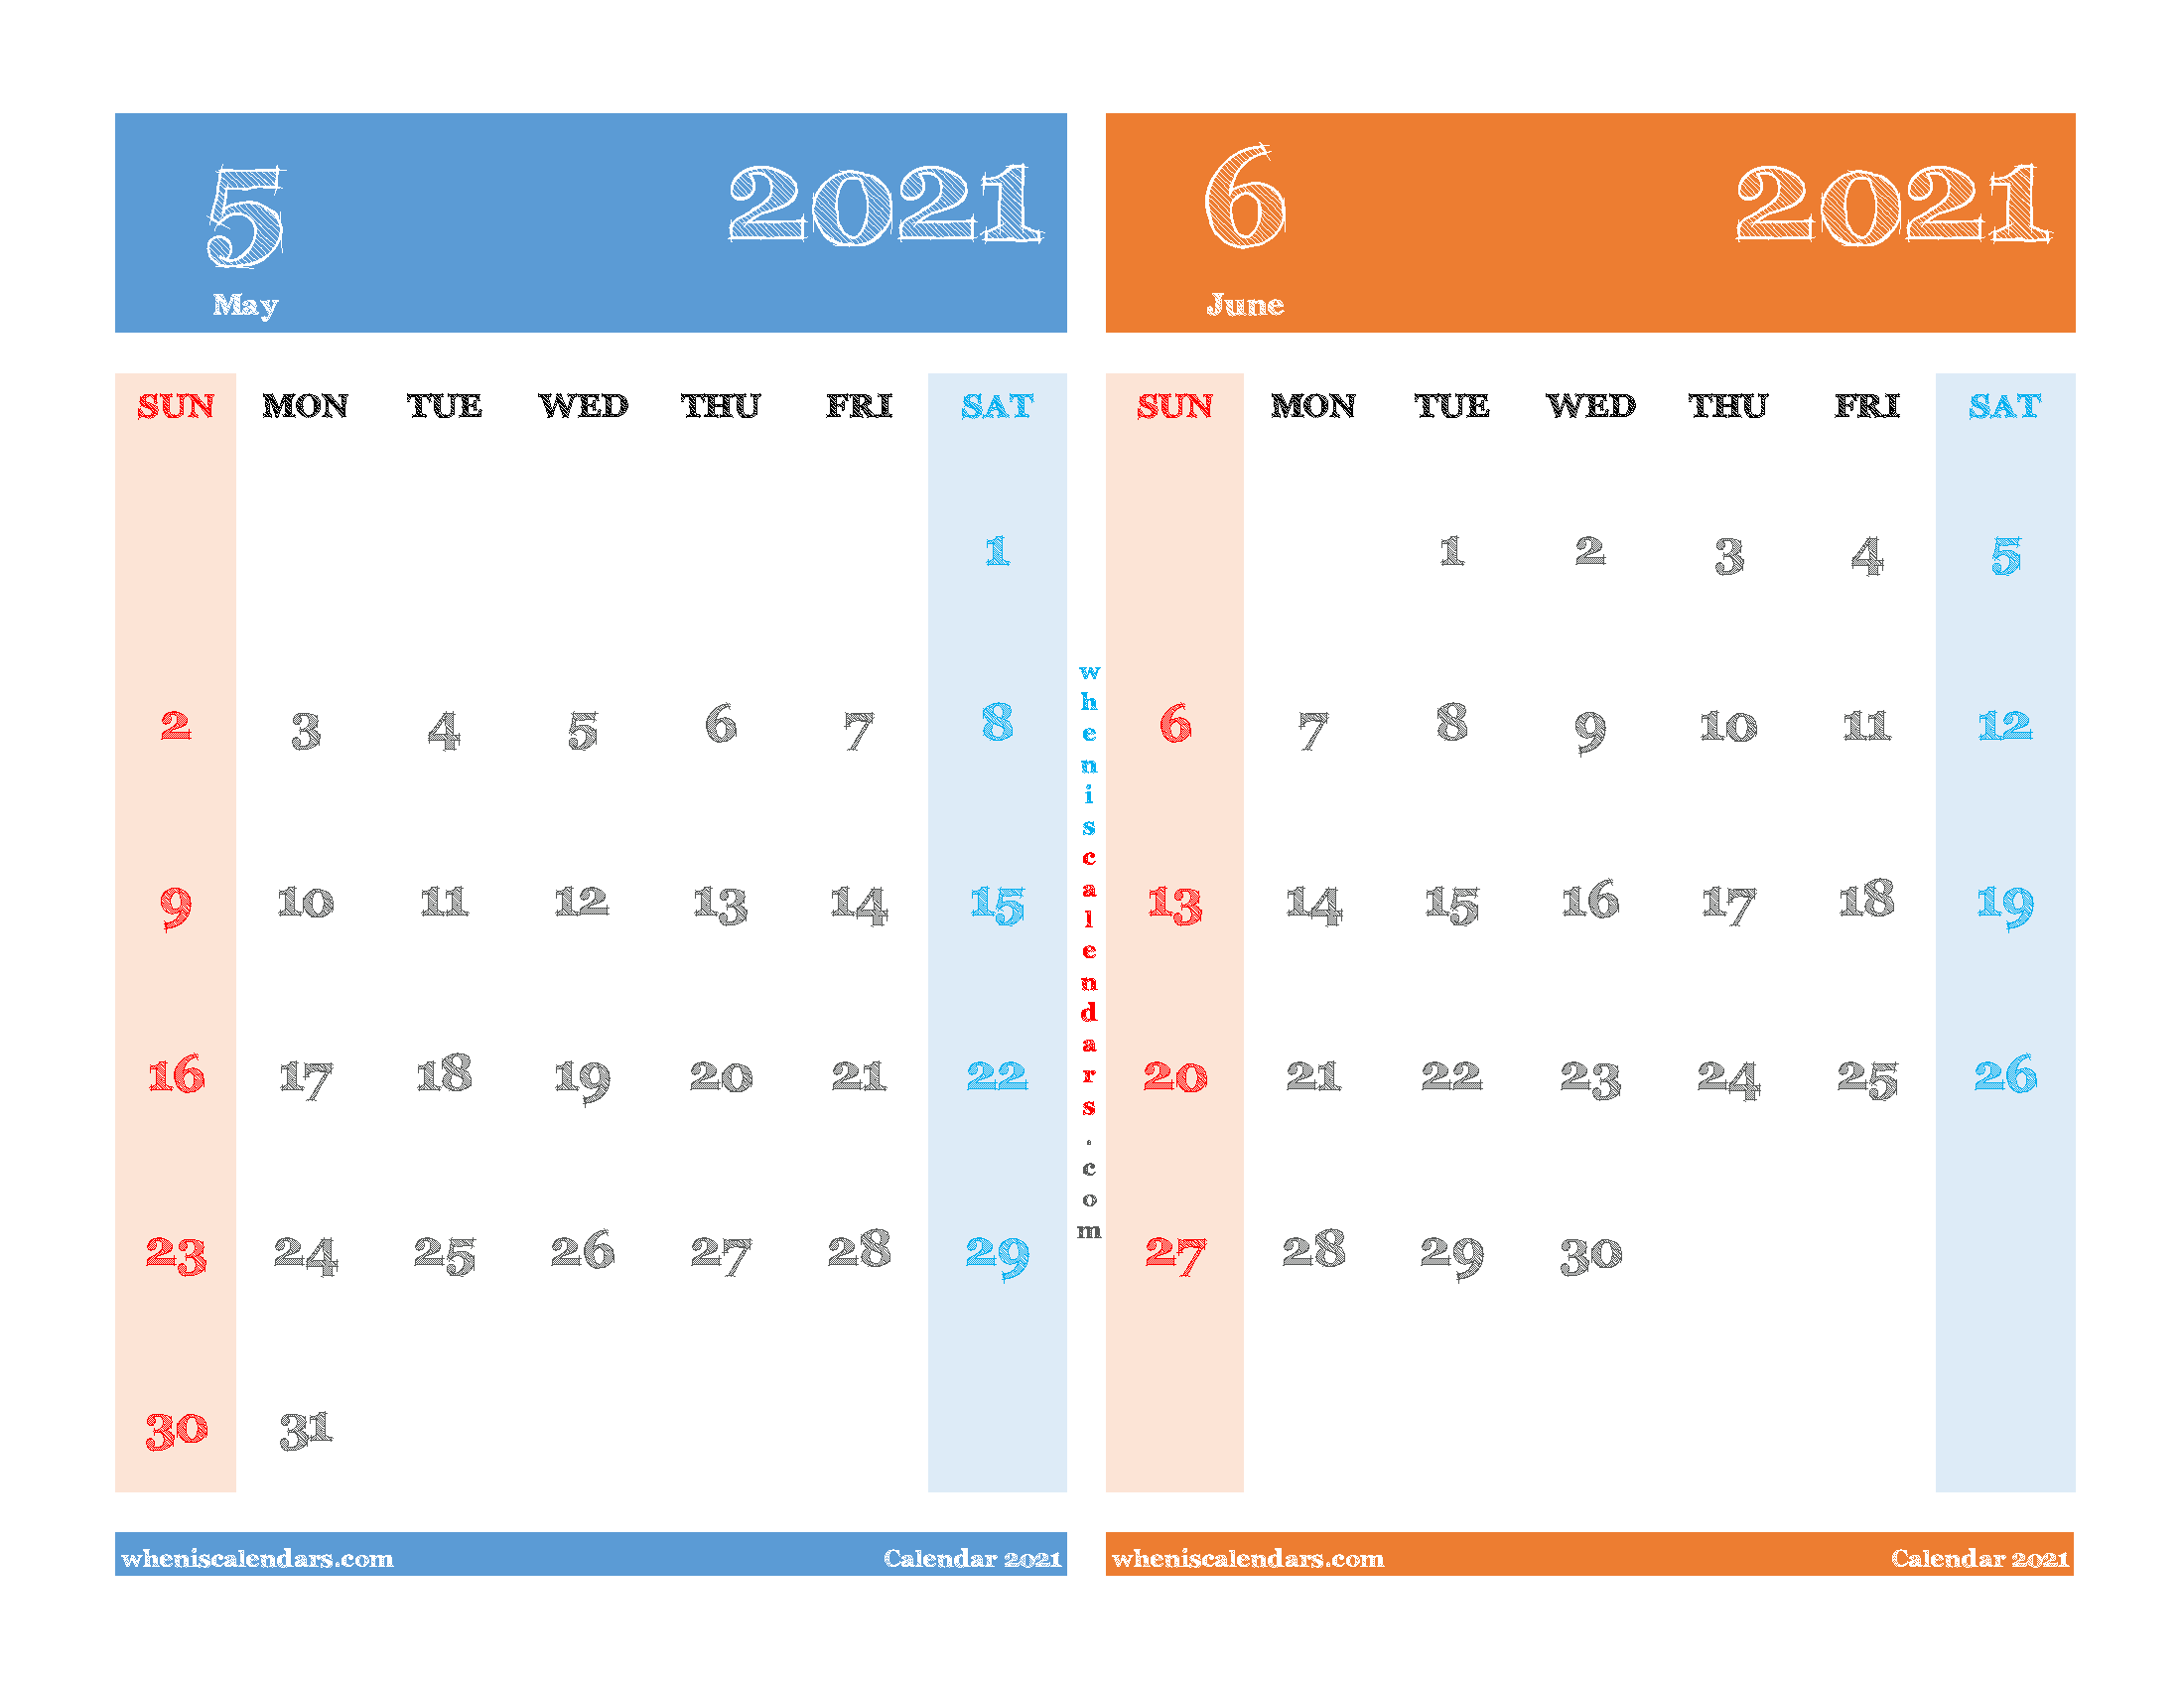 Calendar for May and June 2021